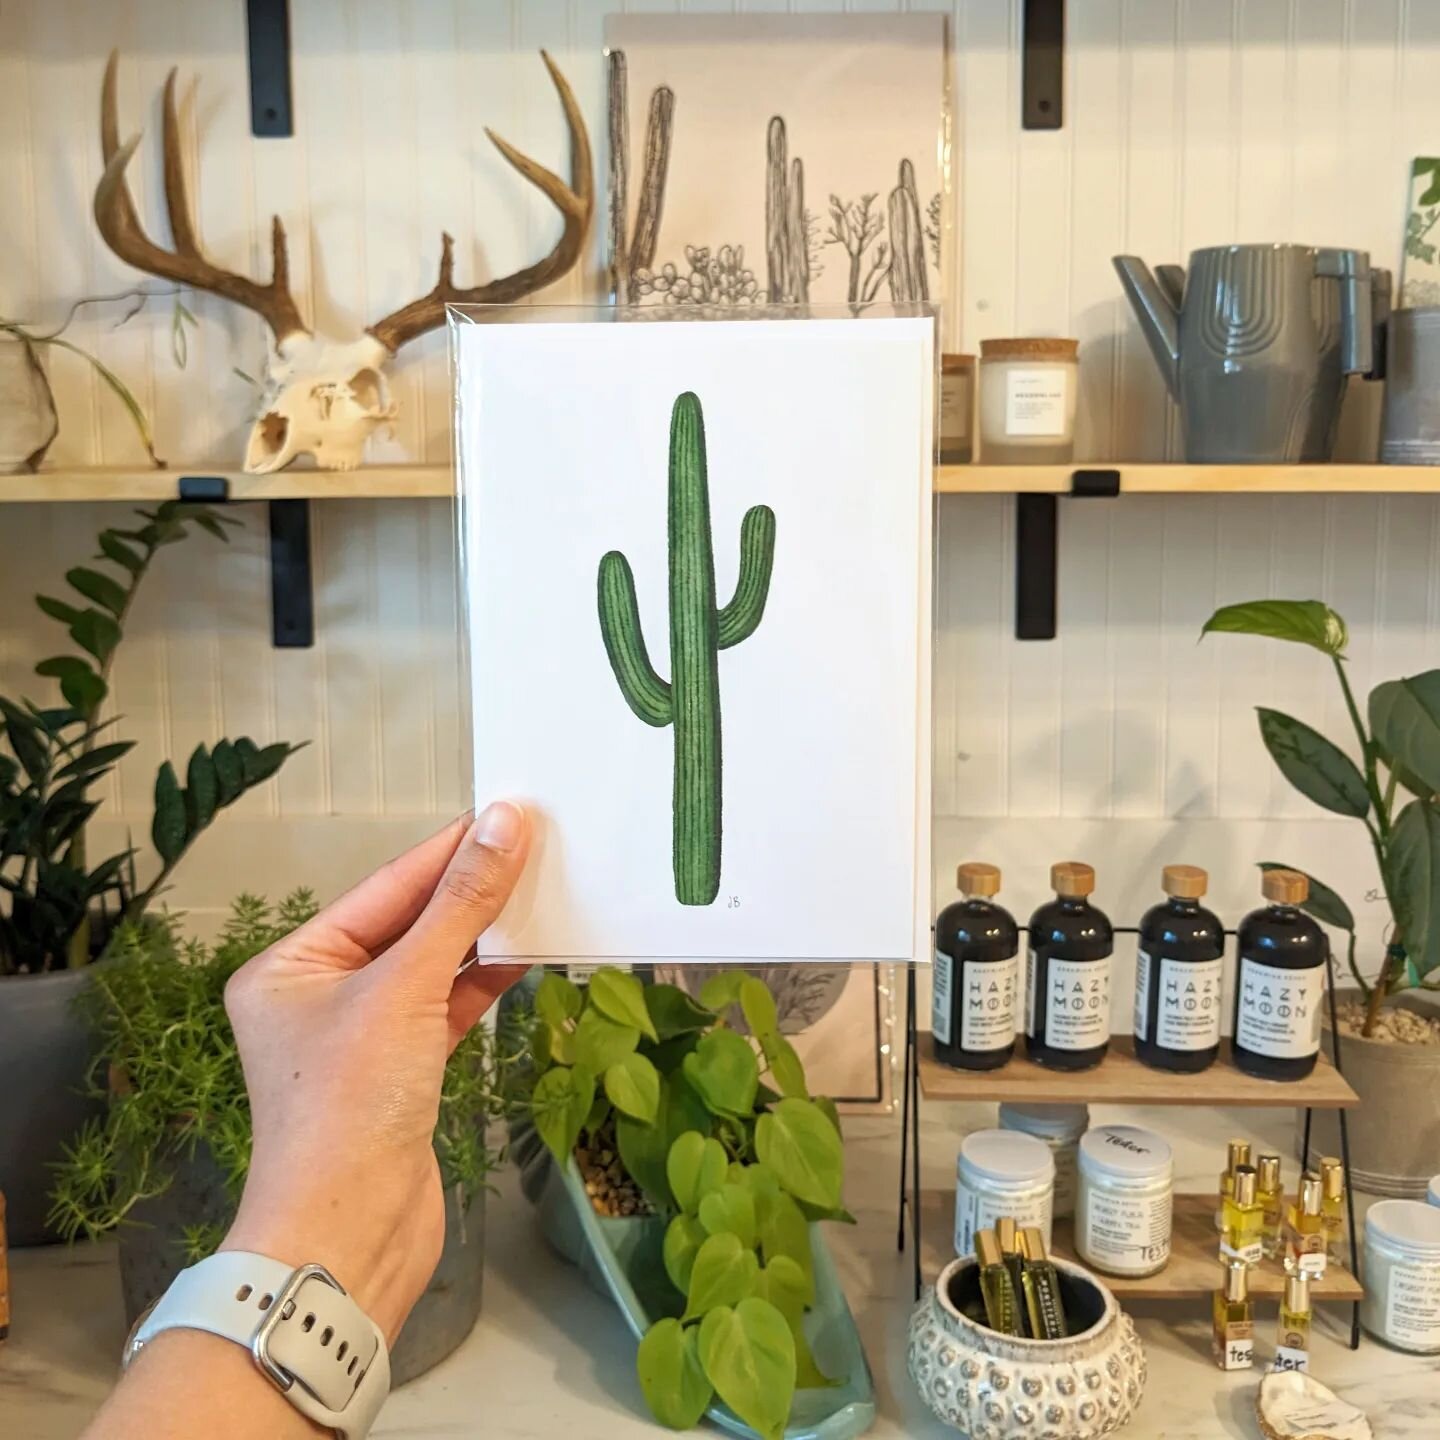 My current favorite card! 😍🌵Pictured here with @stuccoandsucculents gorgeous display at @maksmercantile in #saladotx
.
.
.
.
.
#bellcountytexas #beltontx #saguarocactus #cactusart #cactuslover #cactusartwork #naturelovers #plantlovers #desertvibes 